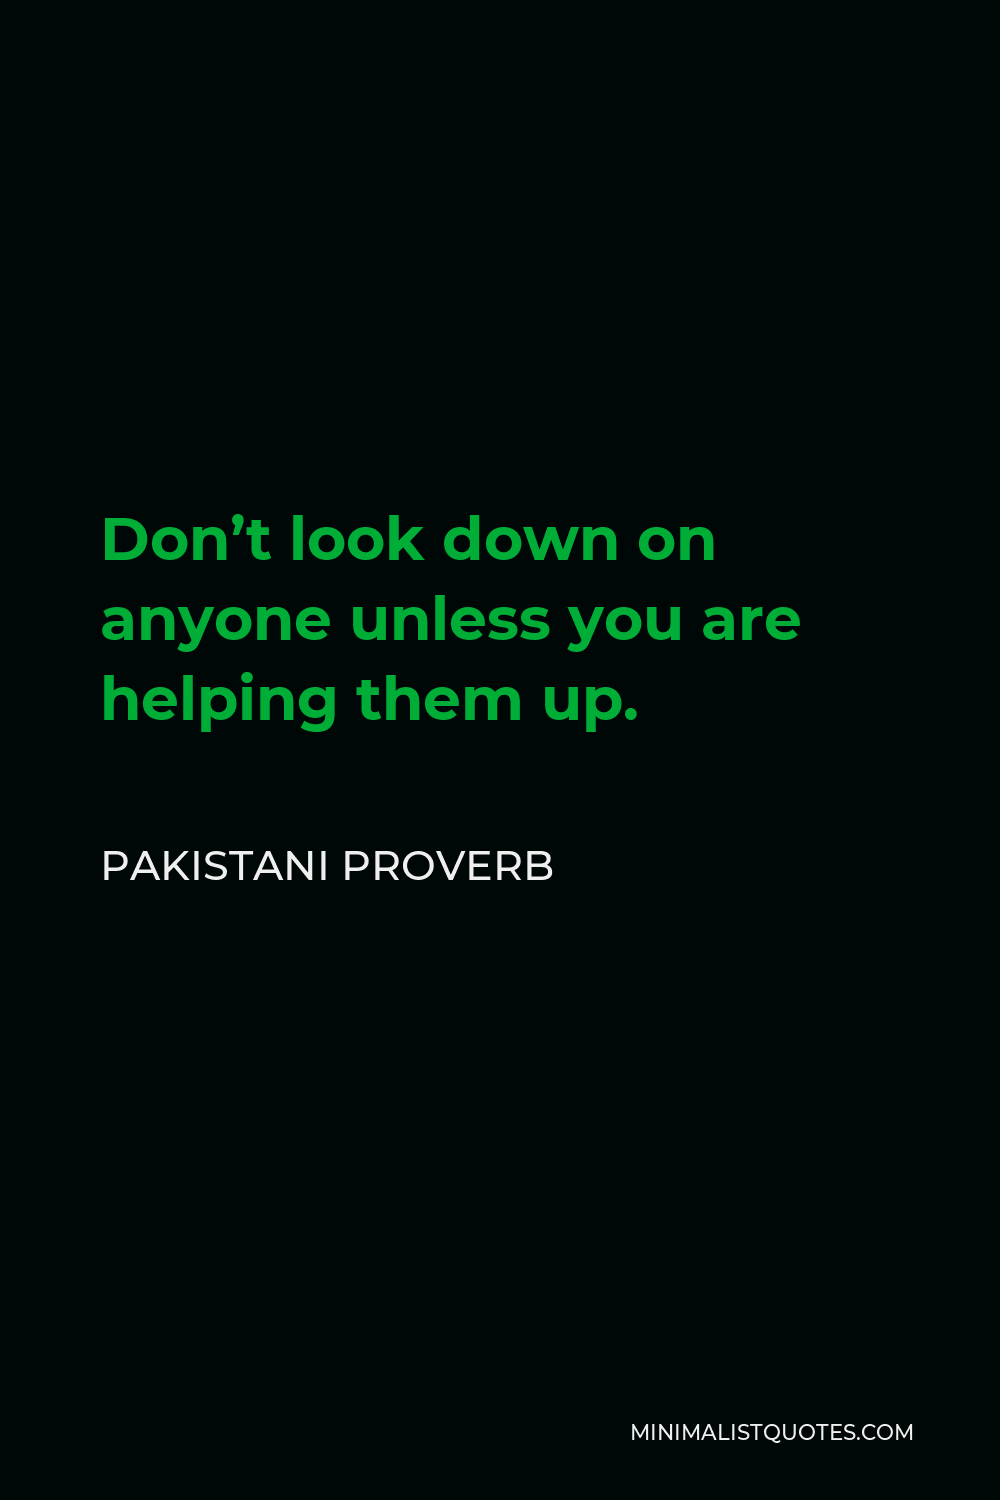 Pakistani Proverb Quote - Don’t look down on anyone unless you are helping them up.